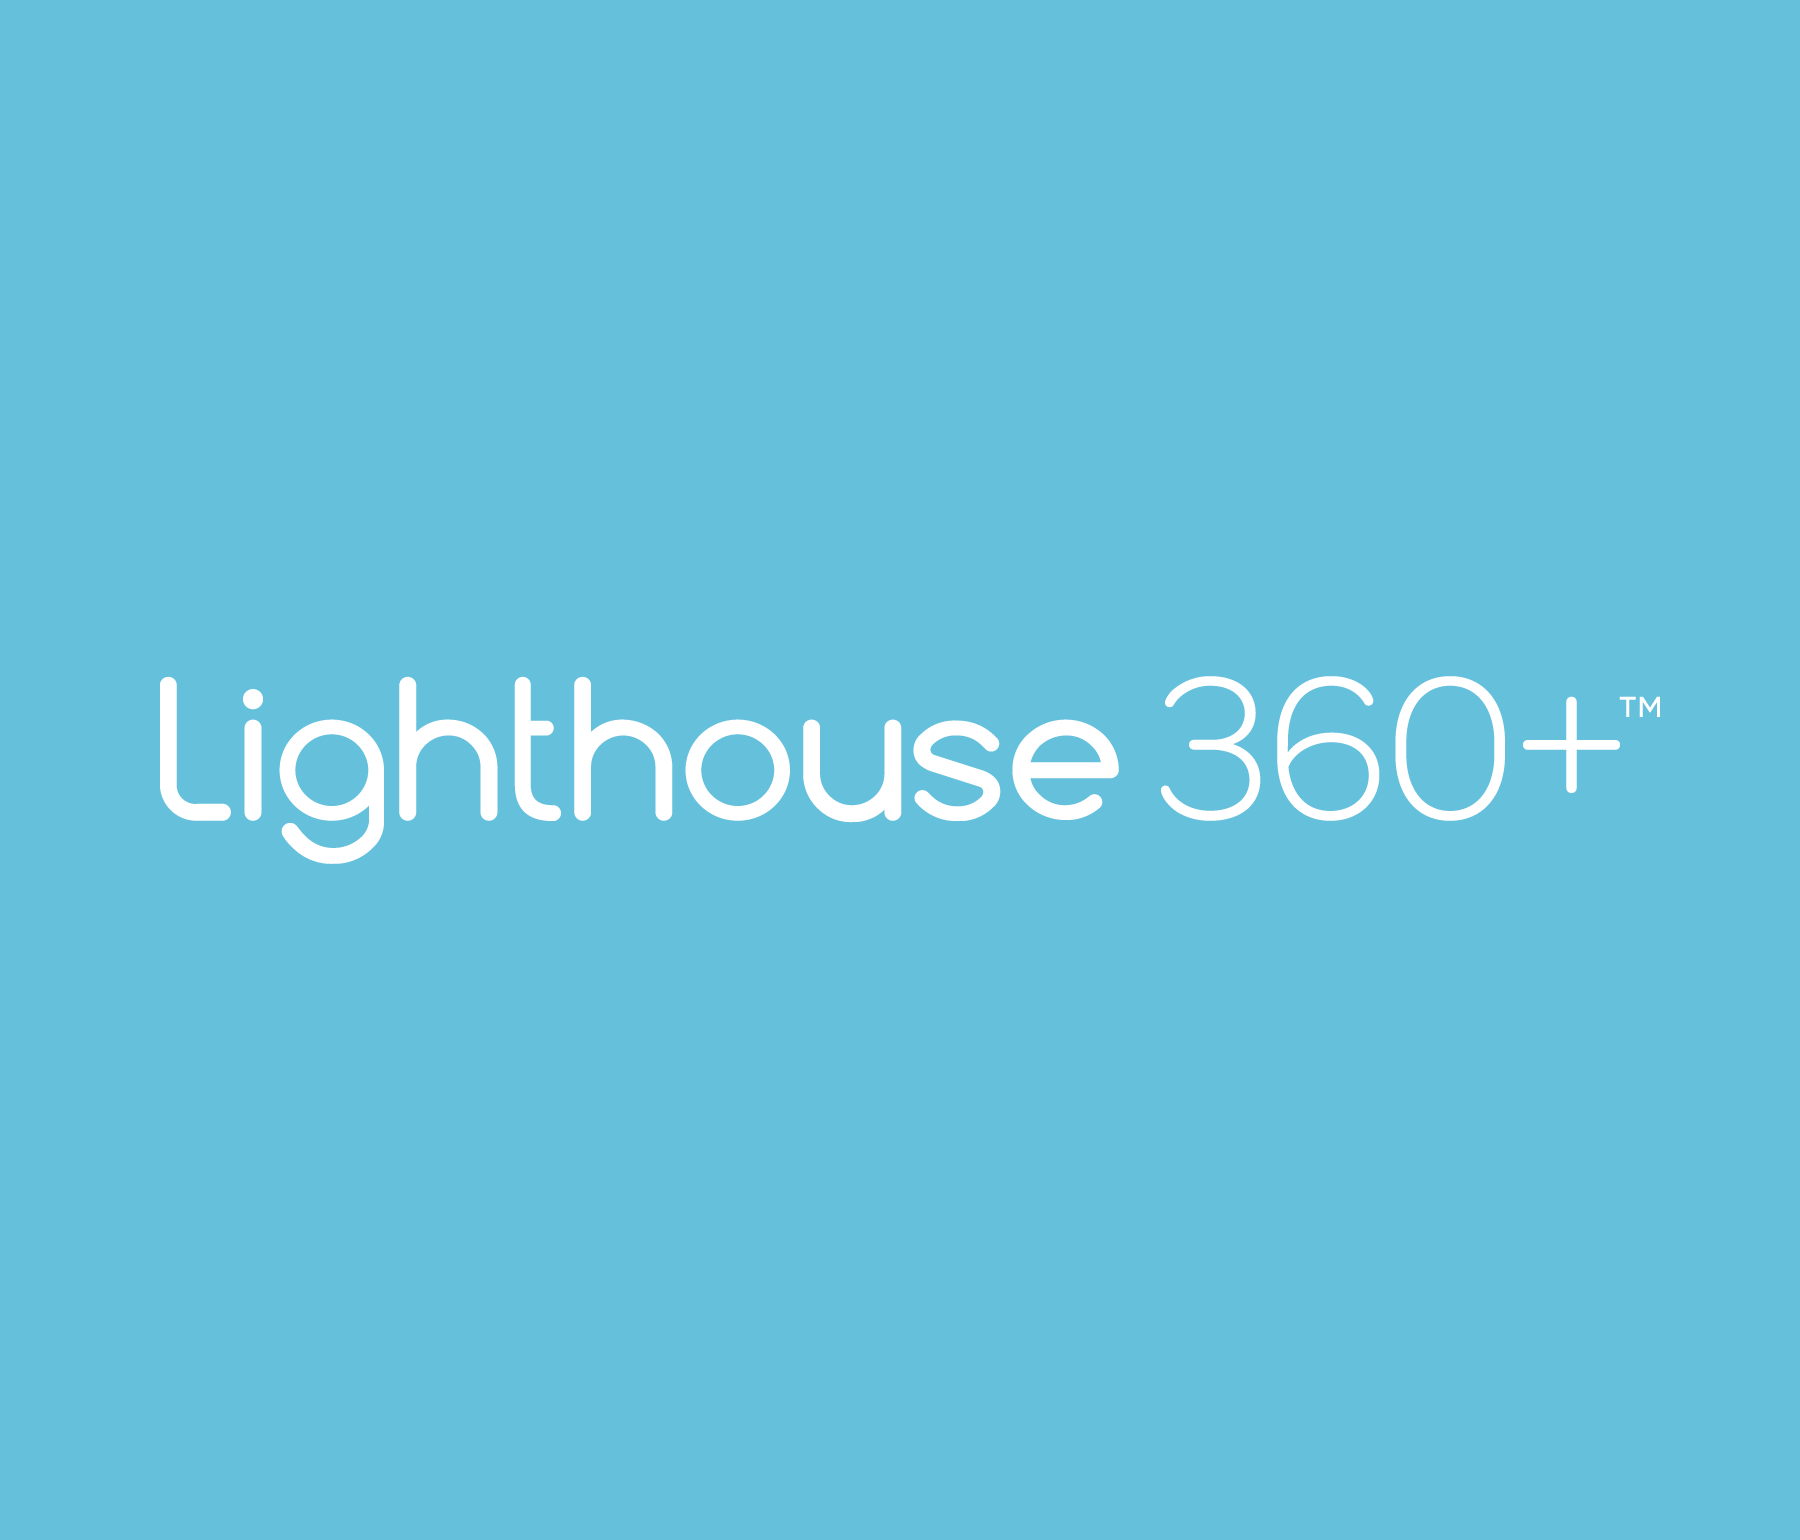 Lighthouse 360+ From Henry Schein One to Work With any Practice Management System. Image: © Henry Schein One